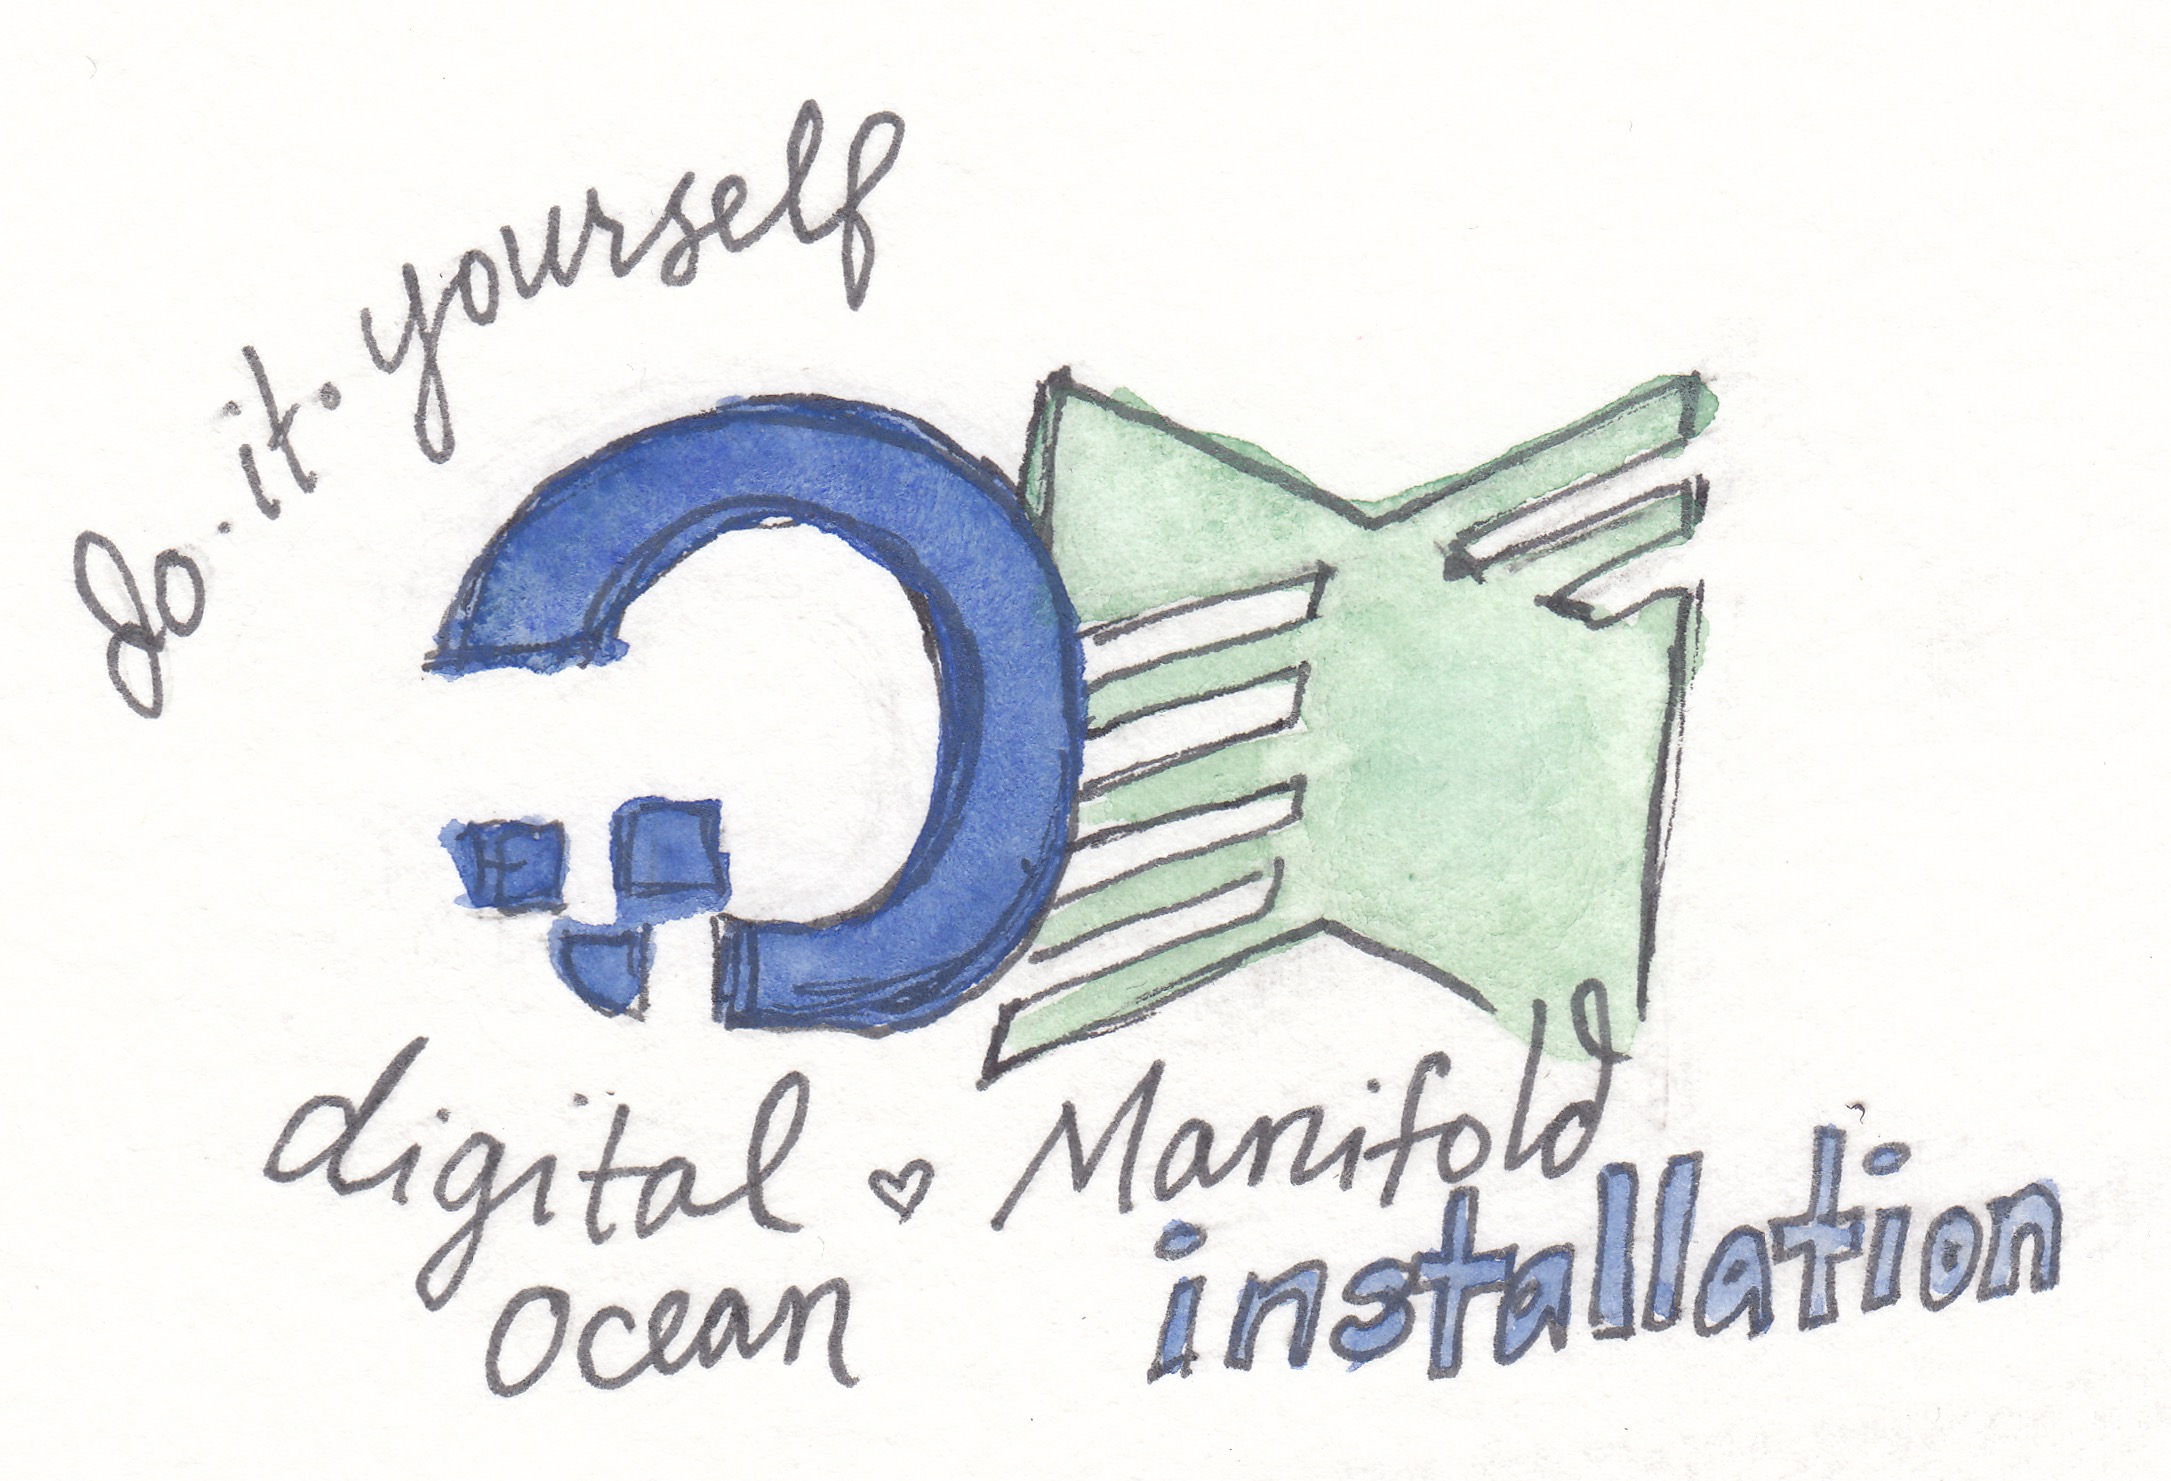 digital ocean and manifold logos with caption do it yourself installation